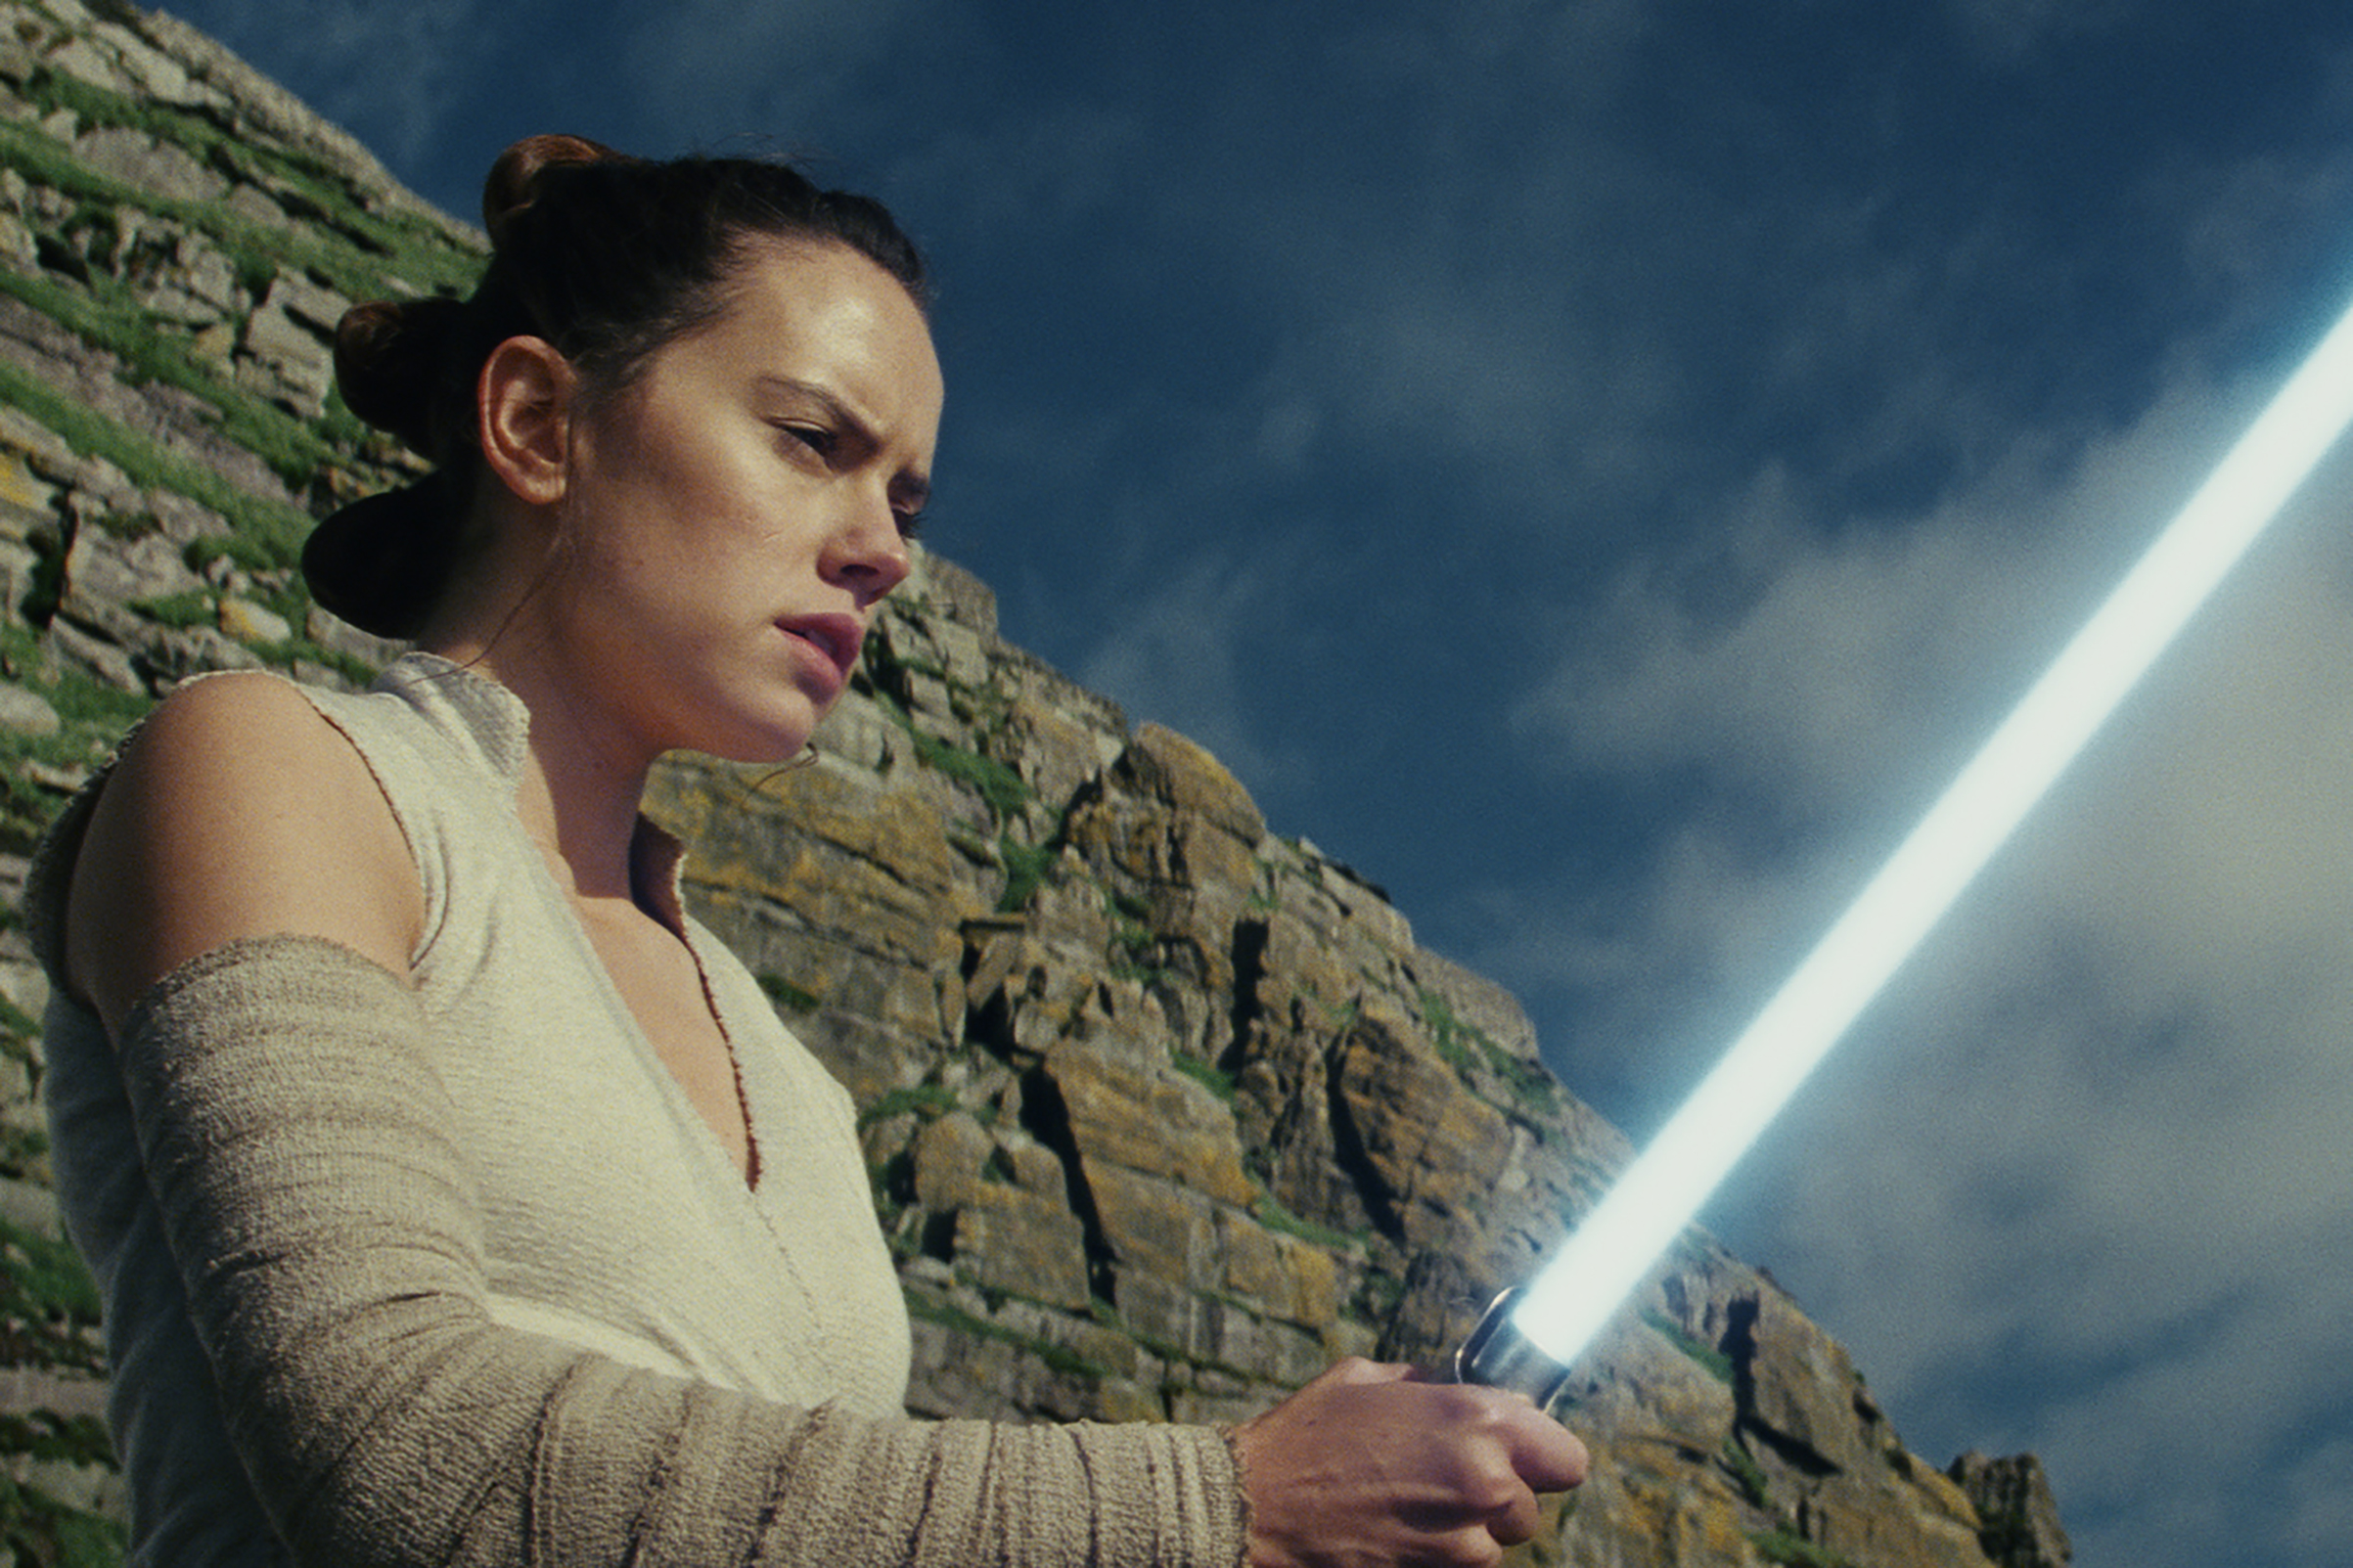 Dark Side Rey And Double Bladed Lightsaber Wallpapers